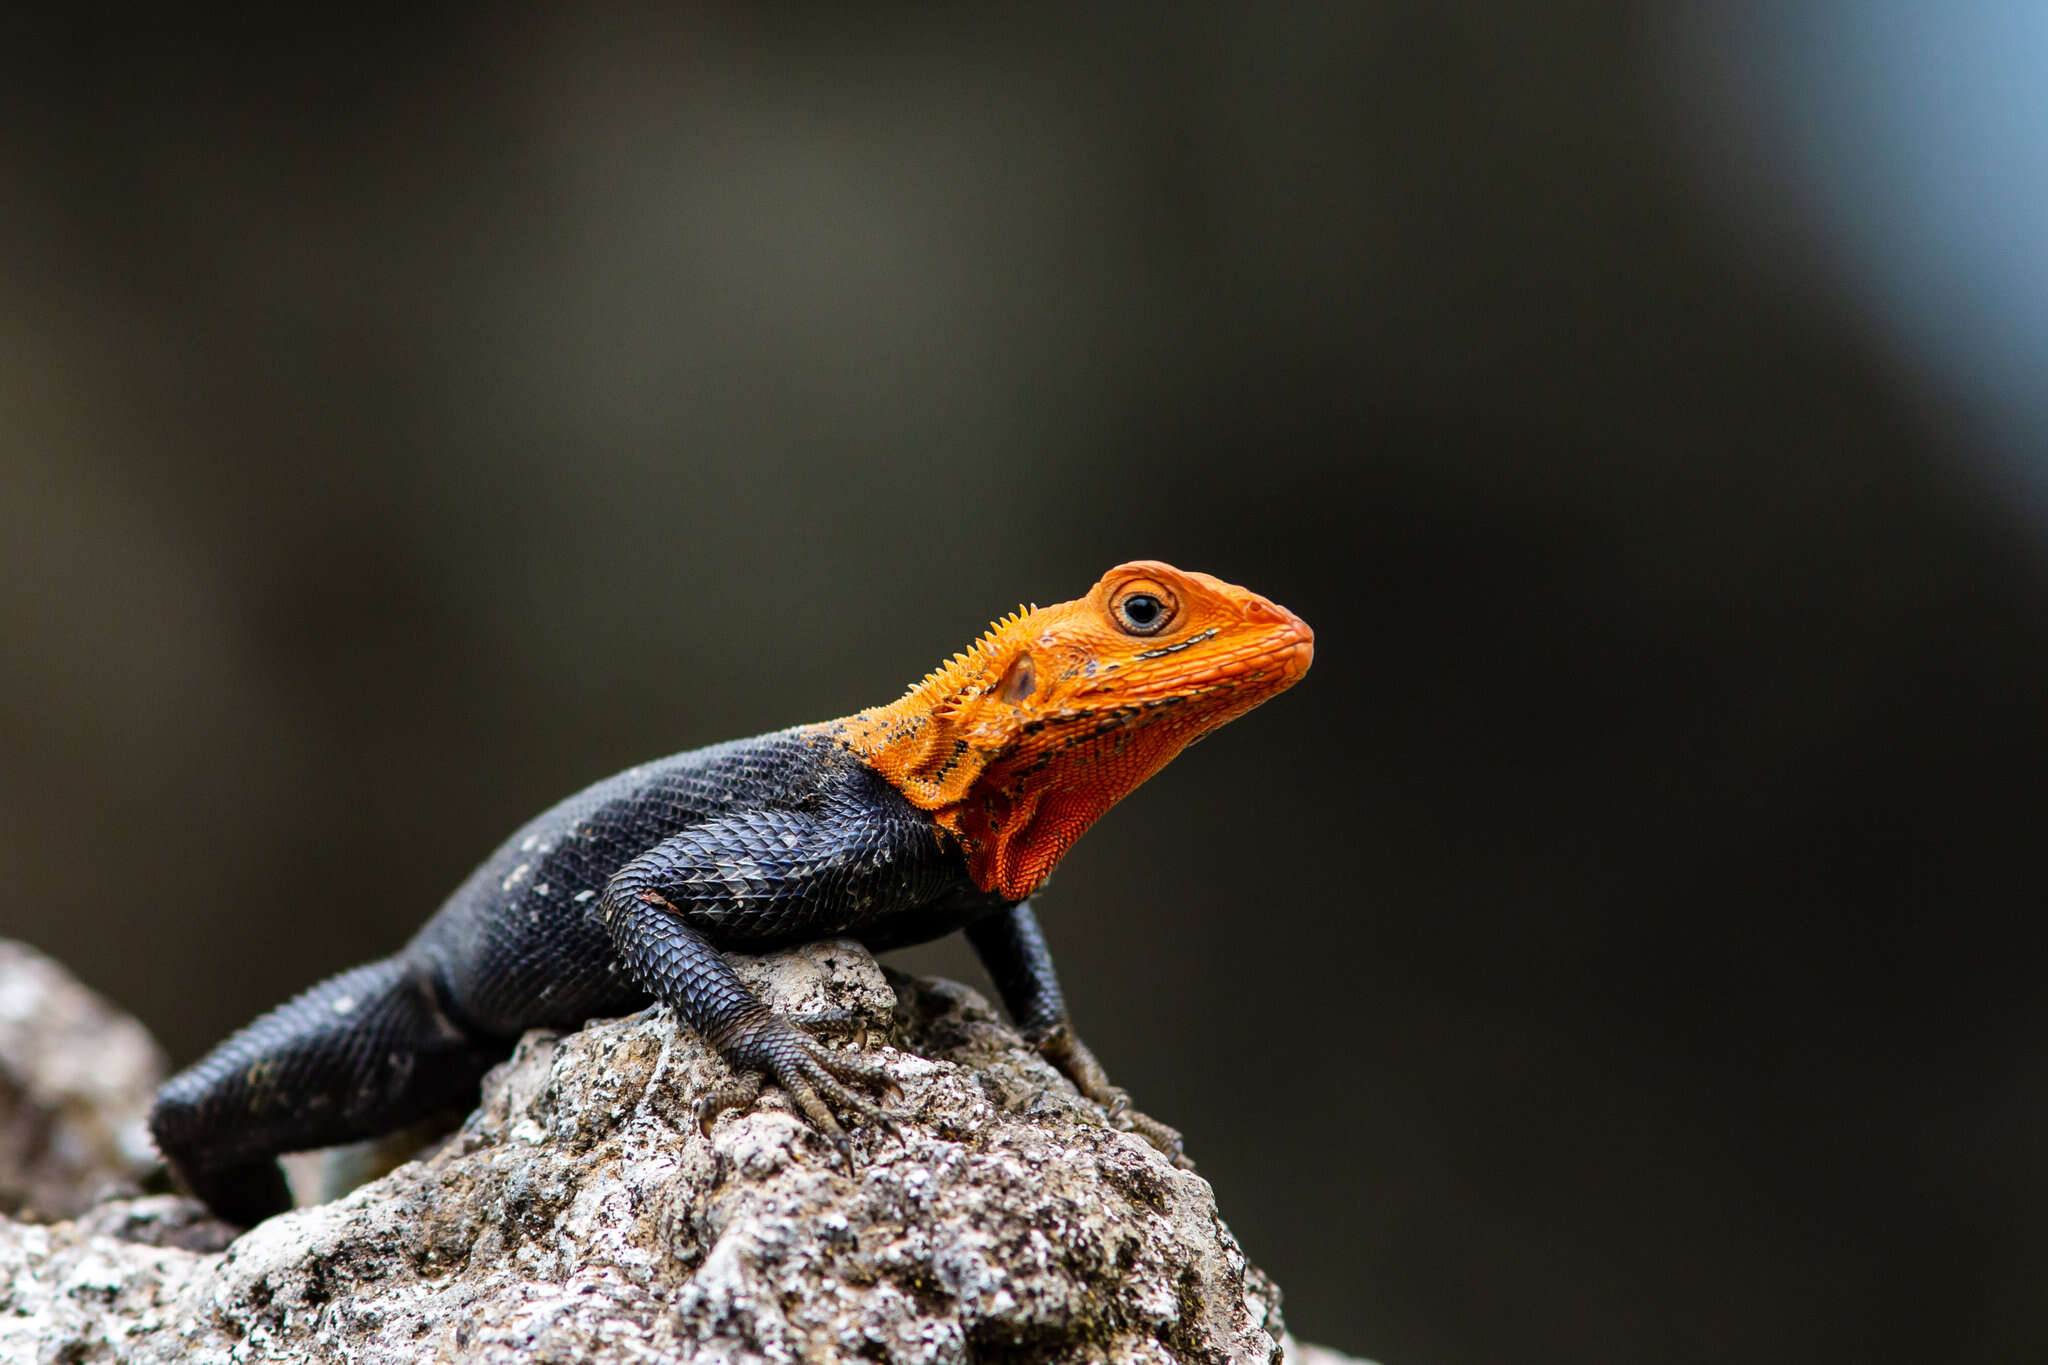 Image of Common agama